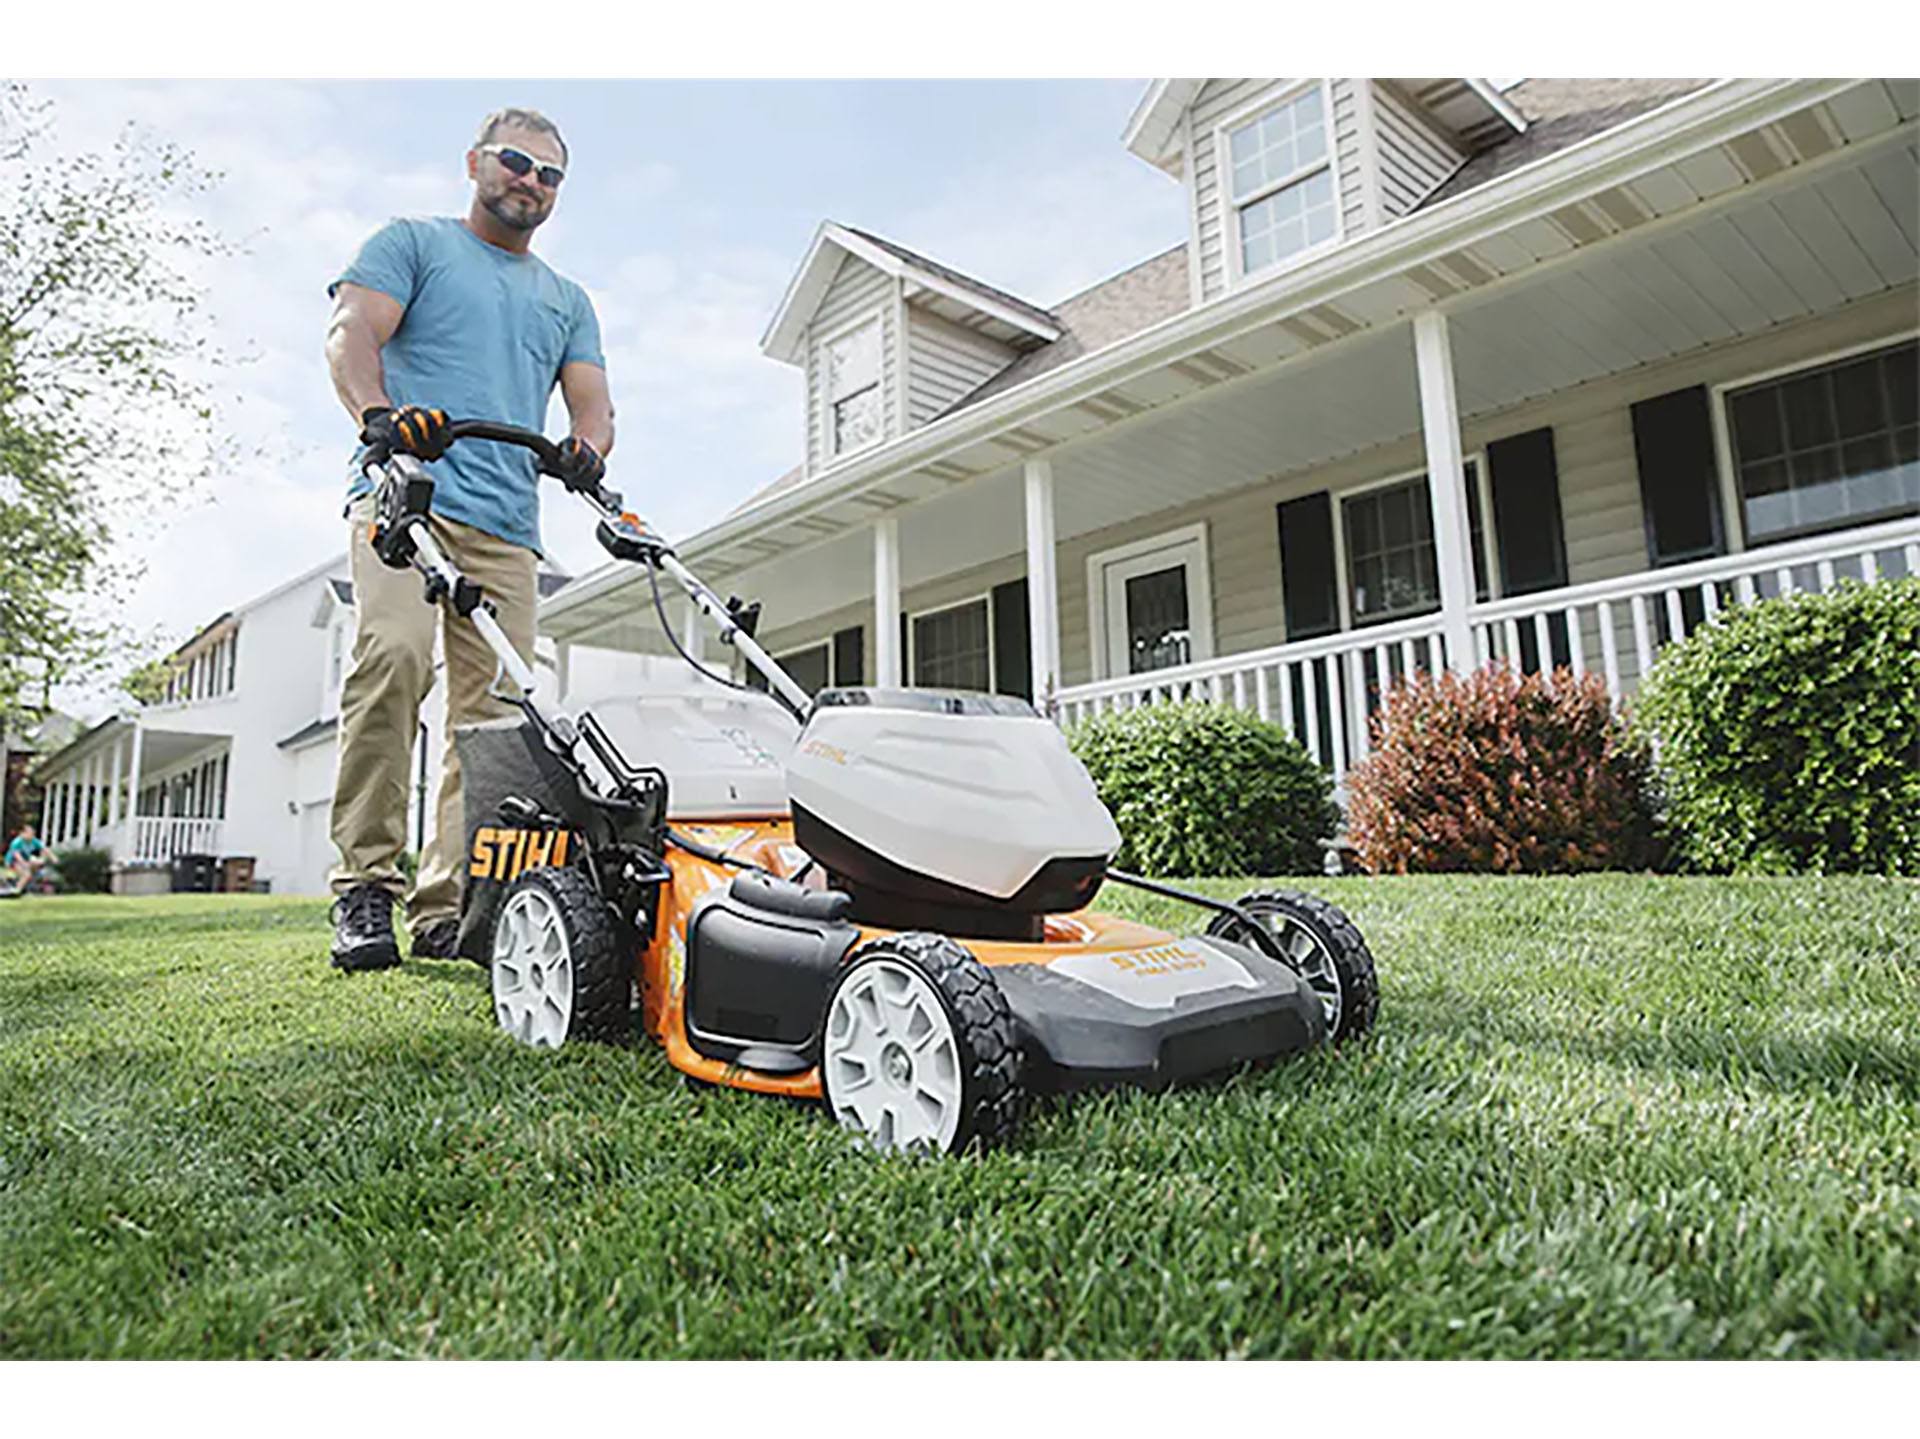 Stihl RMA 510 V 21 in. Self-Propelled w/o Battery & Charger in Philipsburg, Montana - Photo 3